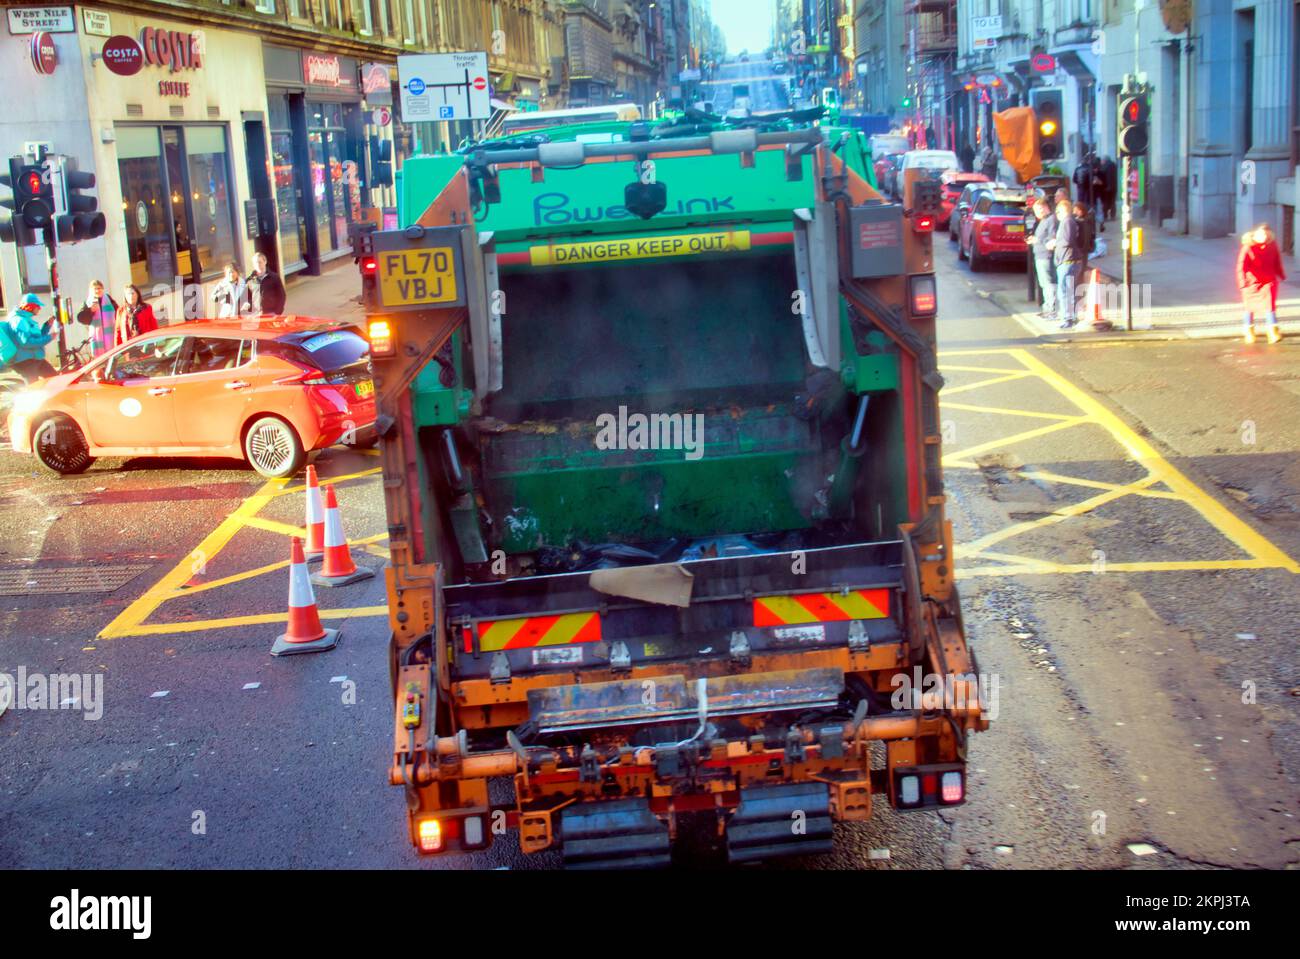 bin men refuse collection trash  removal lorry Stock Photo